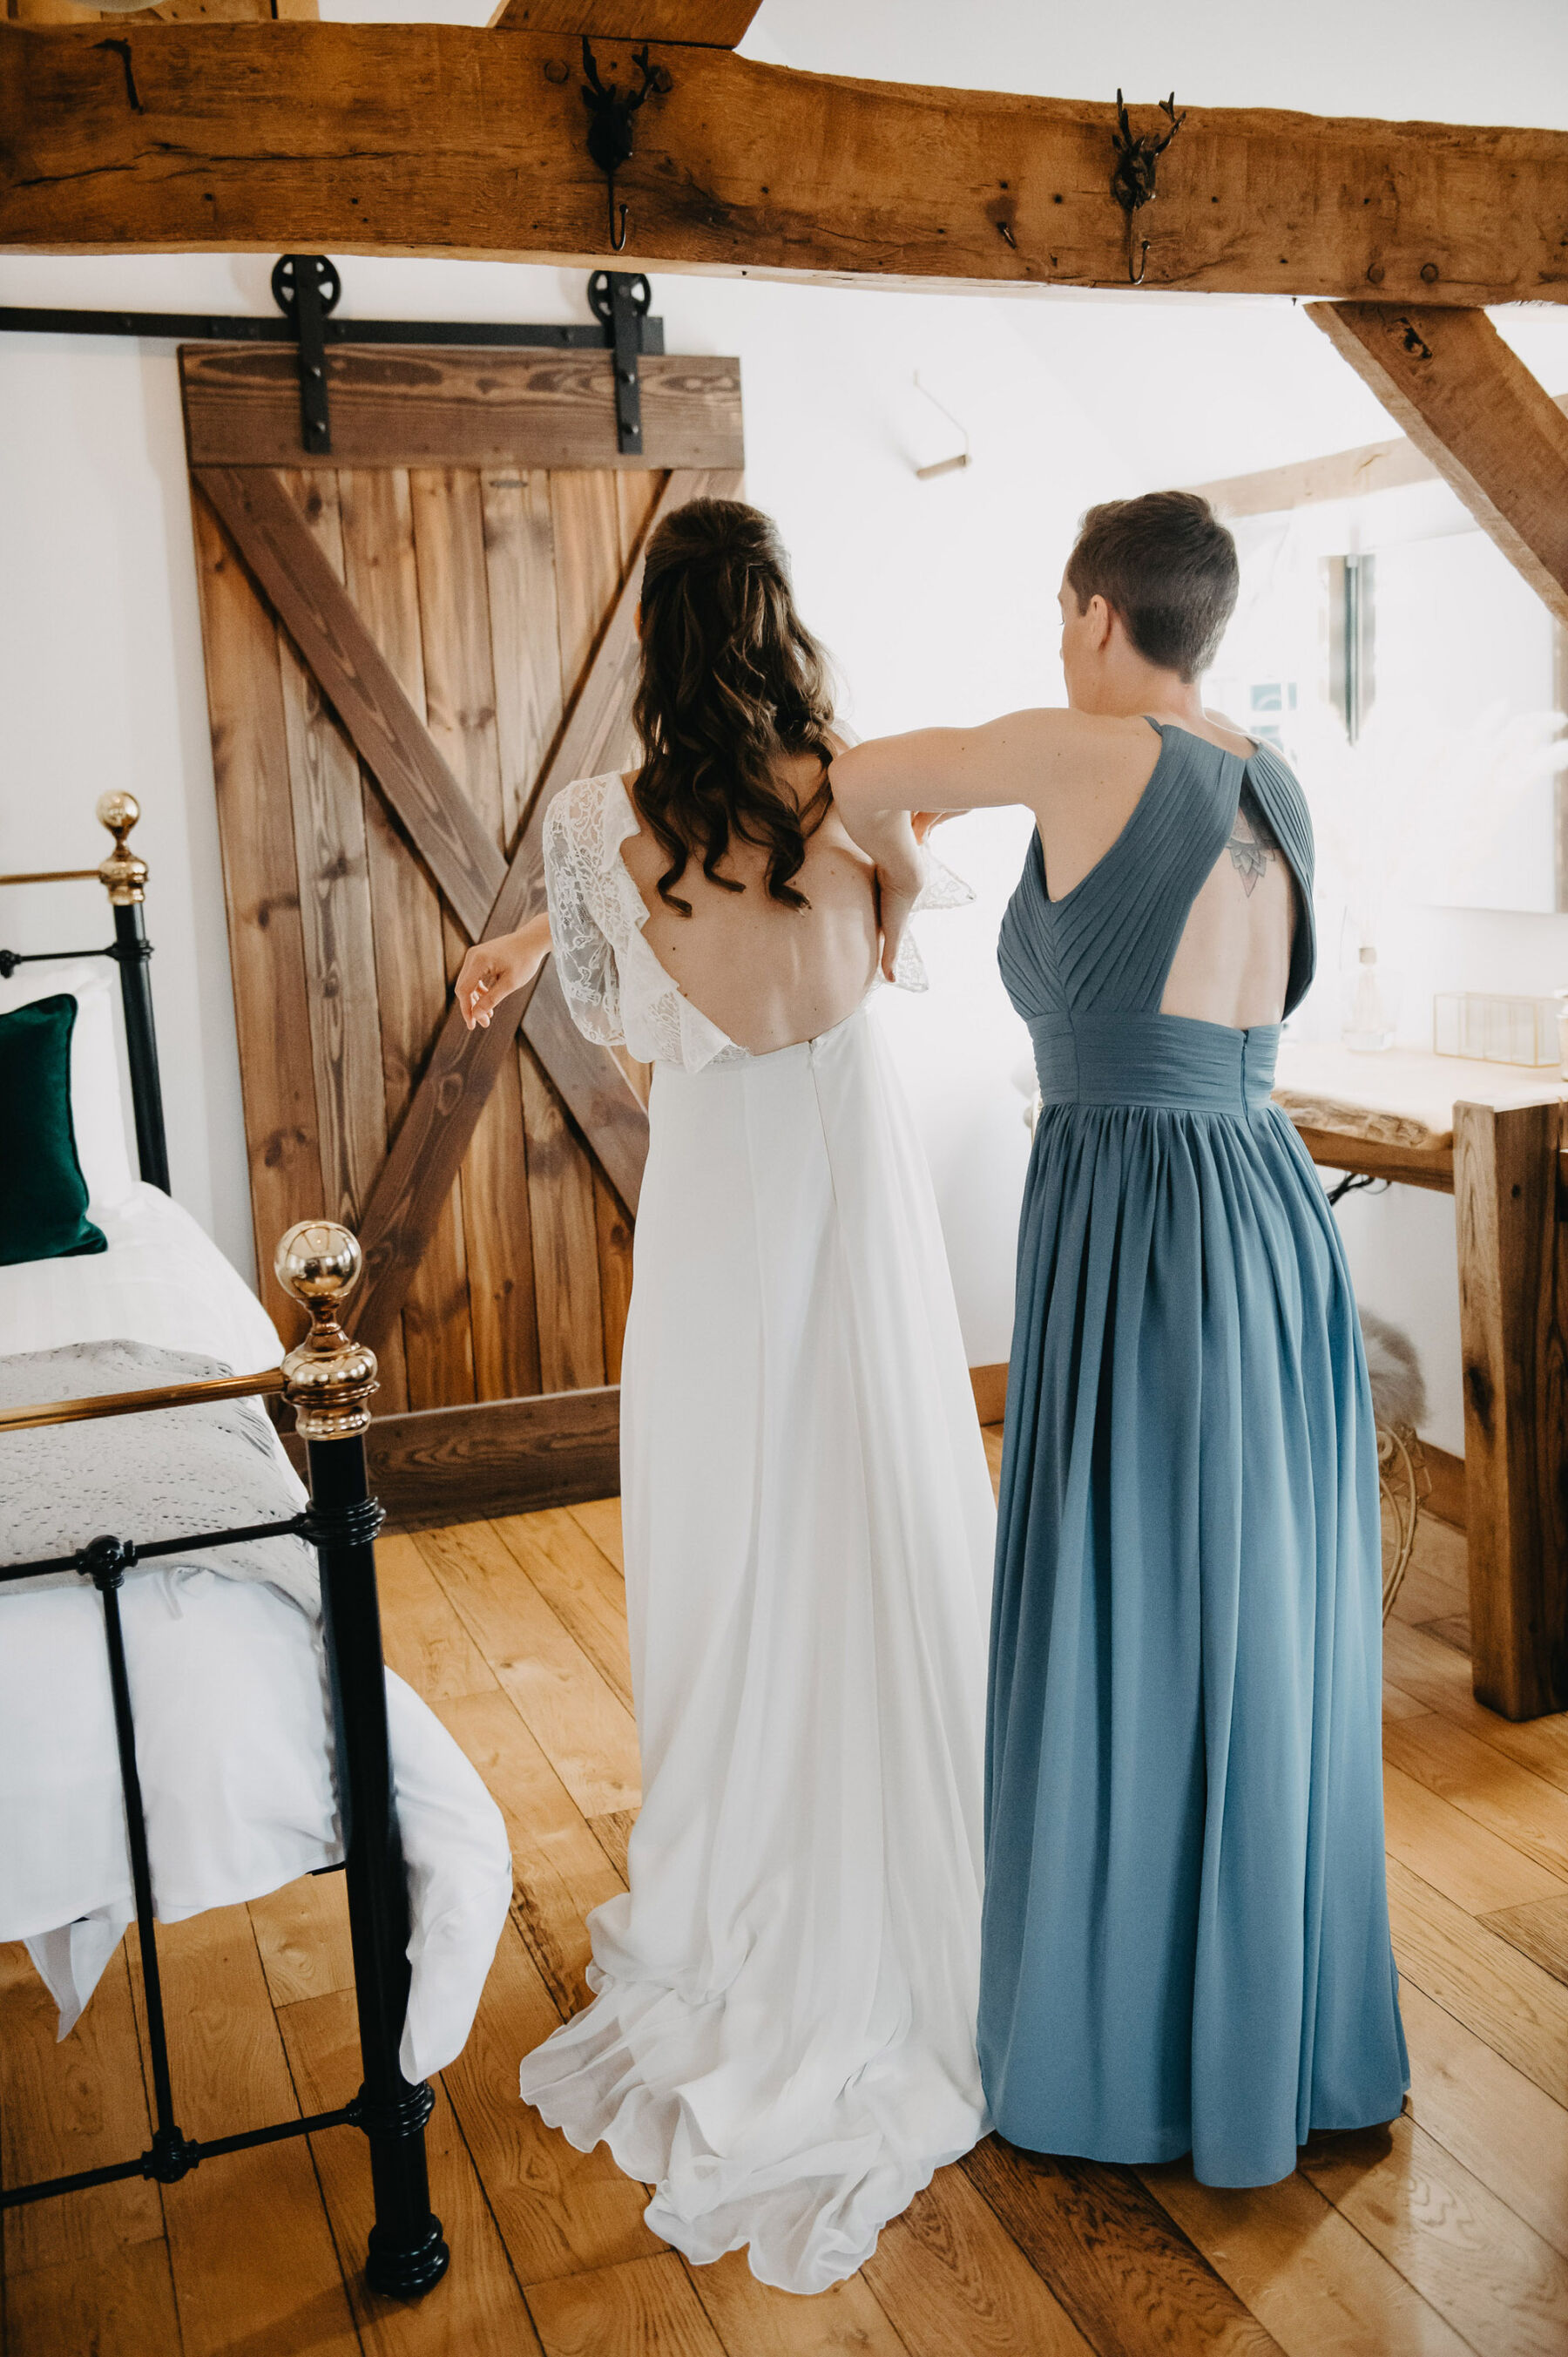 Bridesmaid assisting bride into backless lace wedding dress. Jessica Grace Photography.